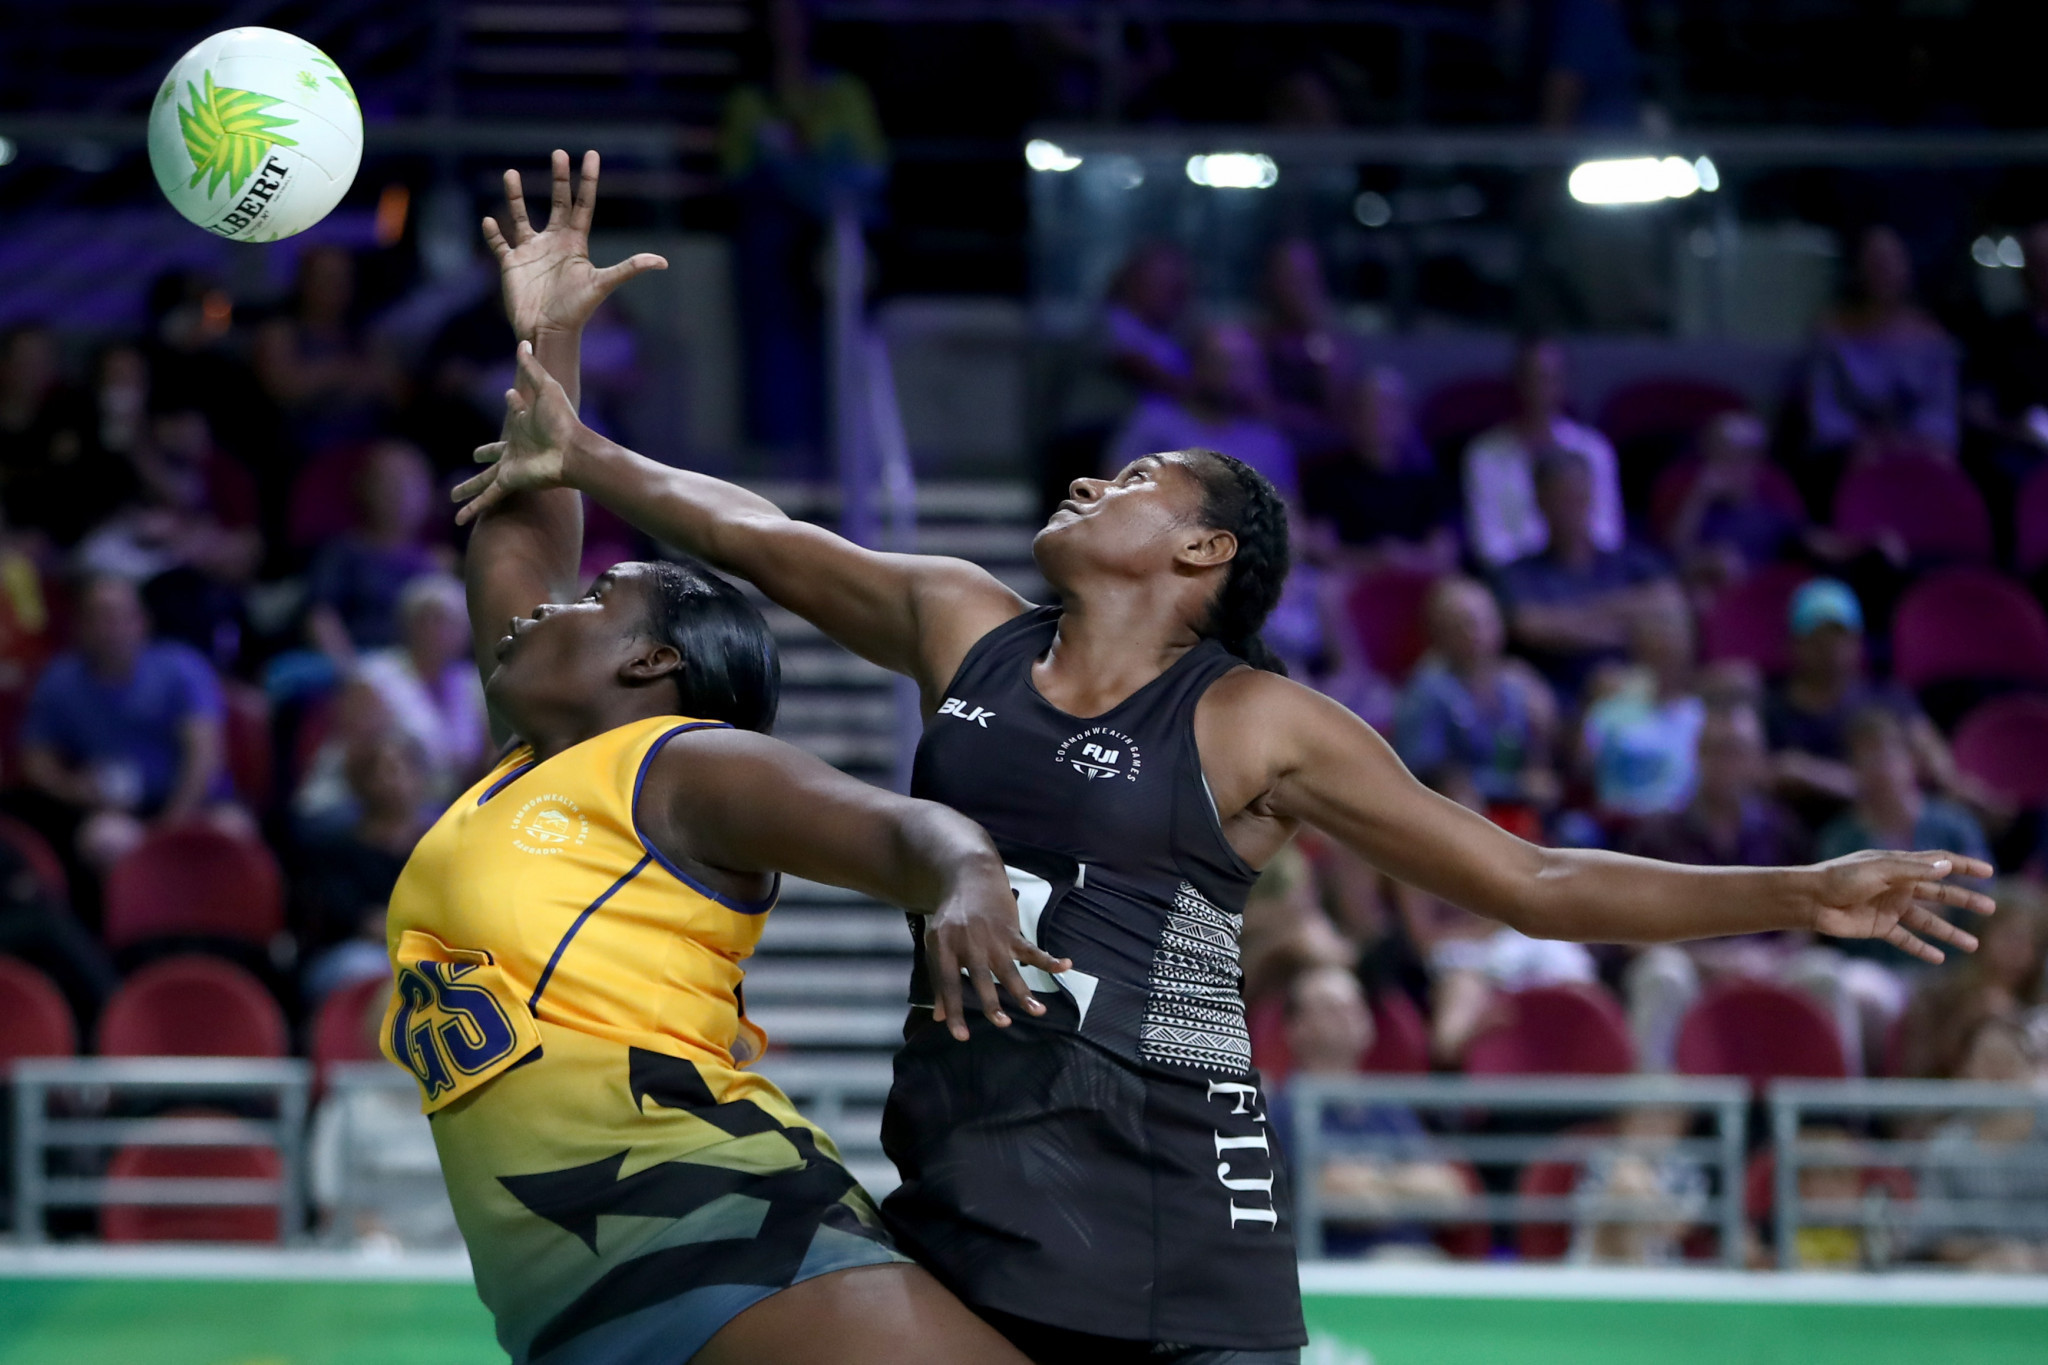 African nations to make debut at PacificAus Netball Series 